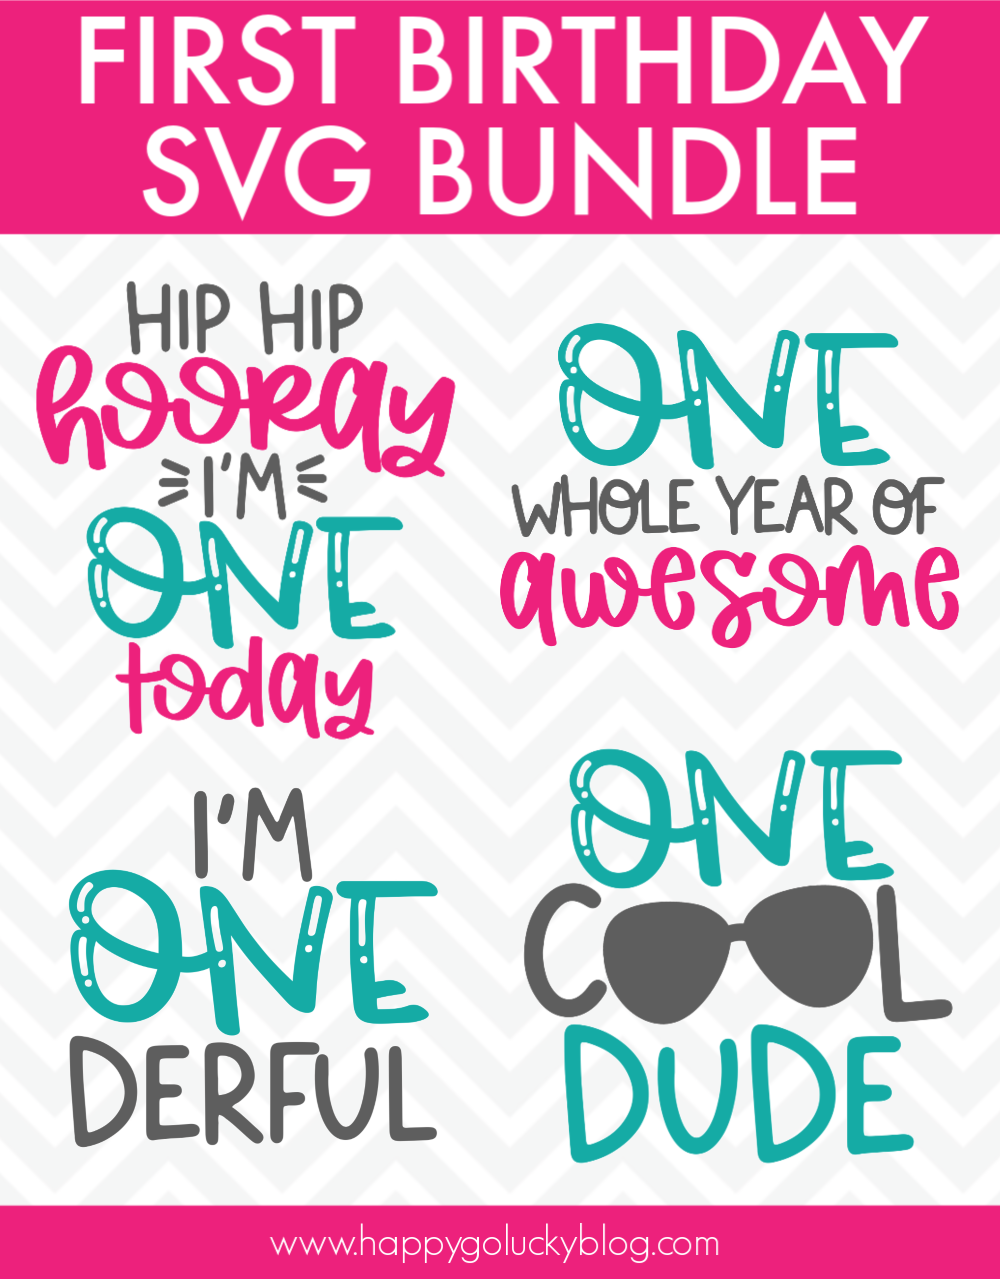 Download First Birthday Svg Bundle Free Download Happy Go Lucky SVG, PNG, EPS, DXF File